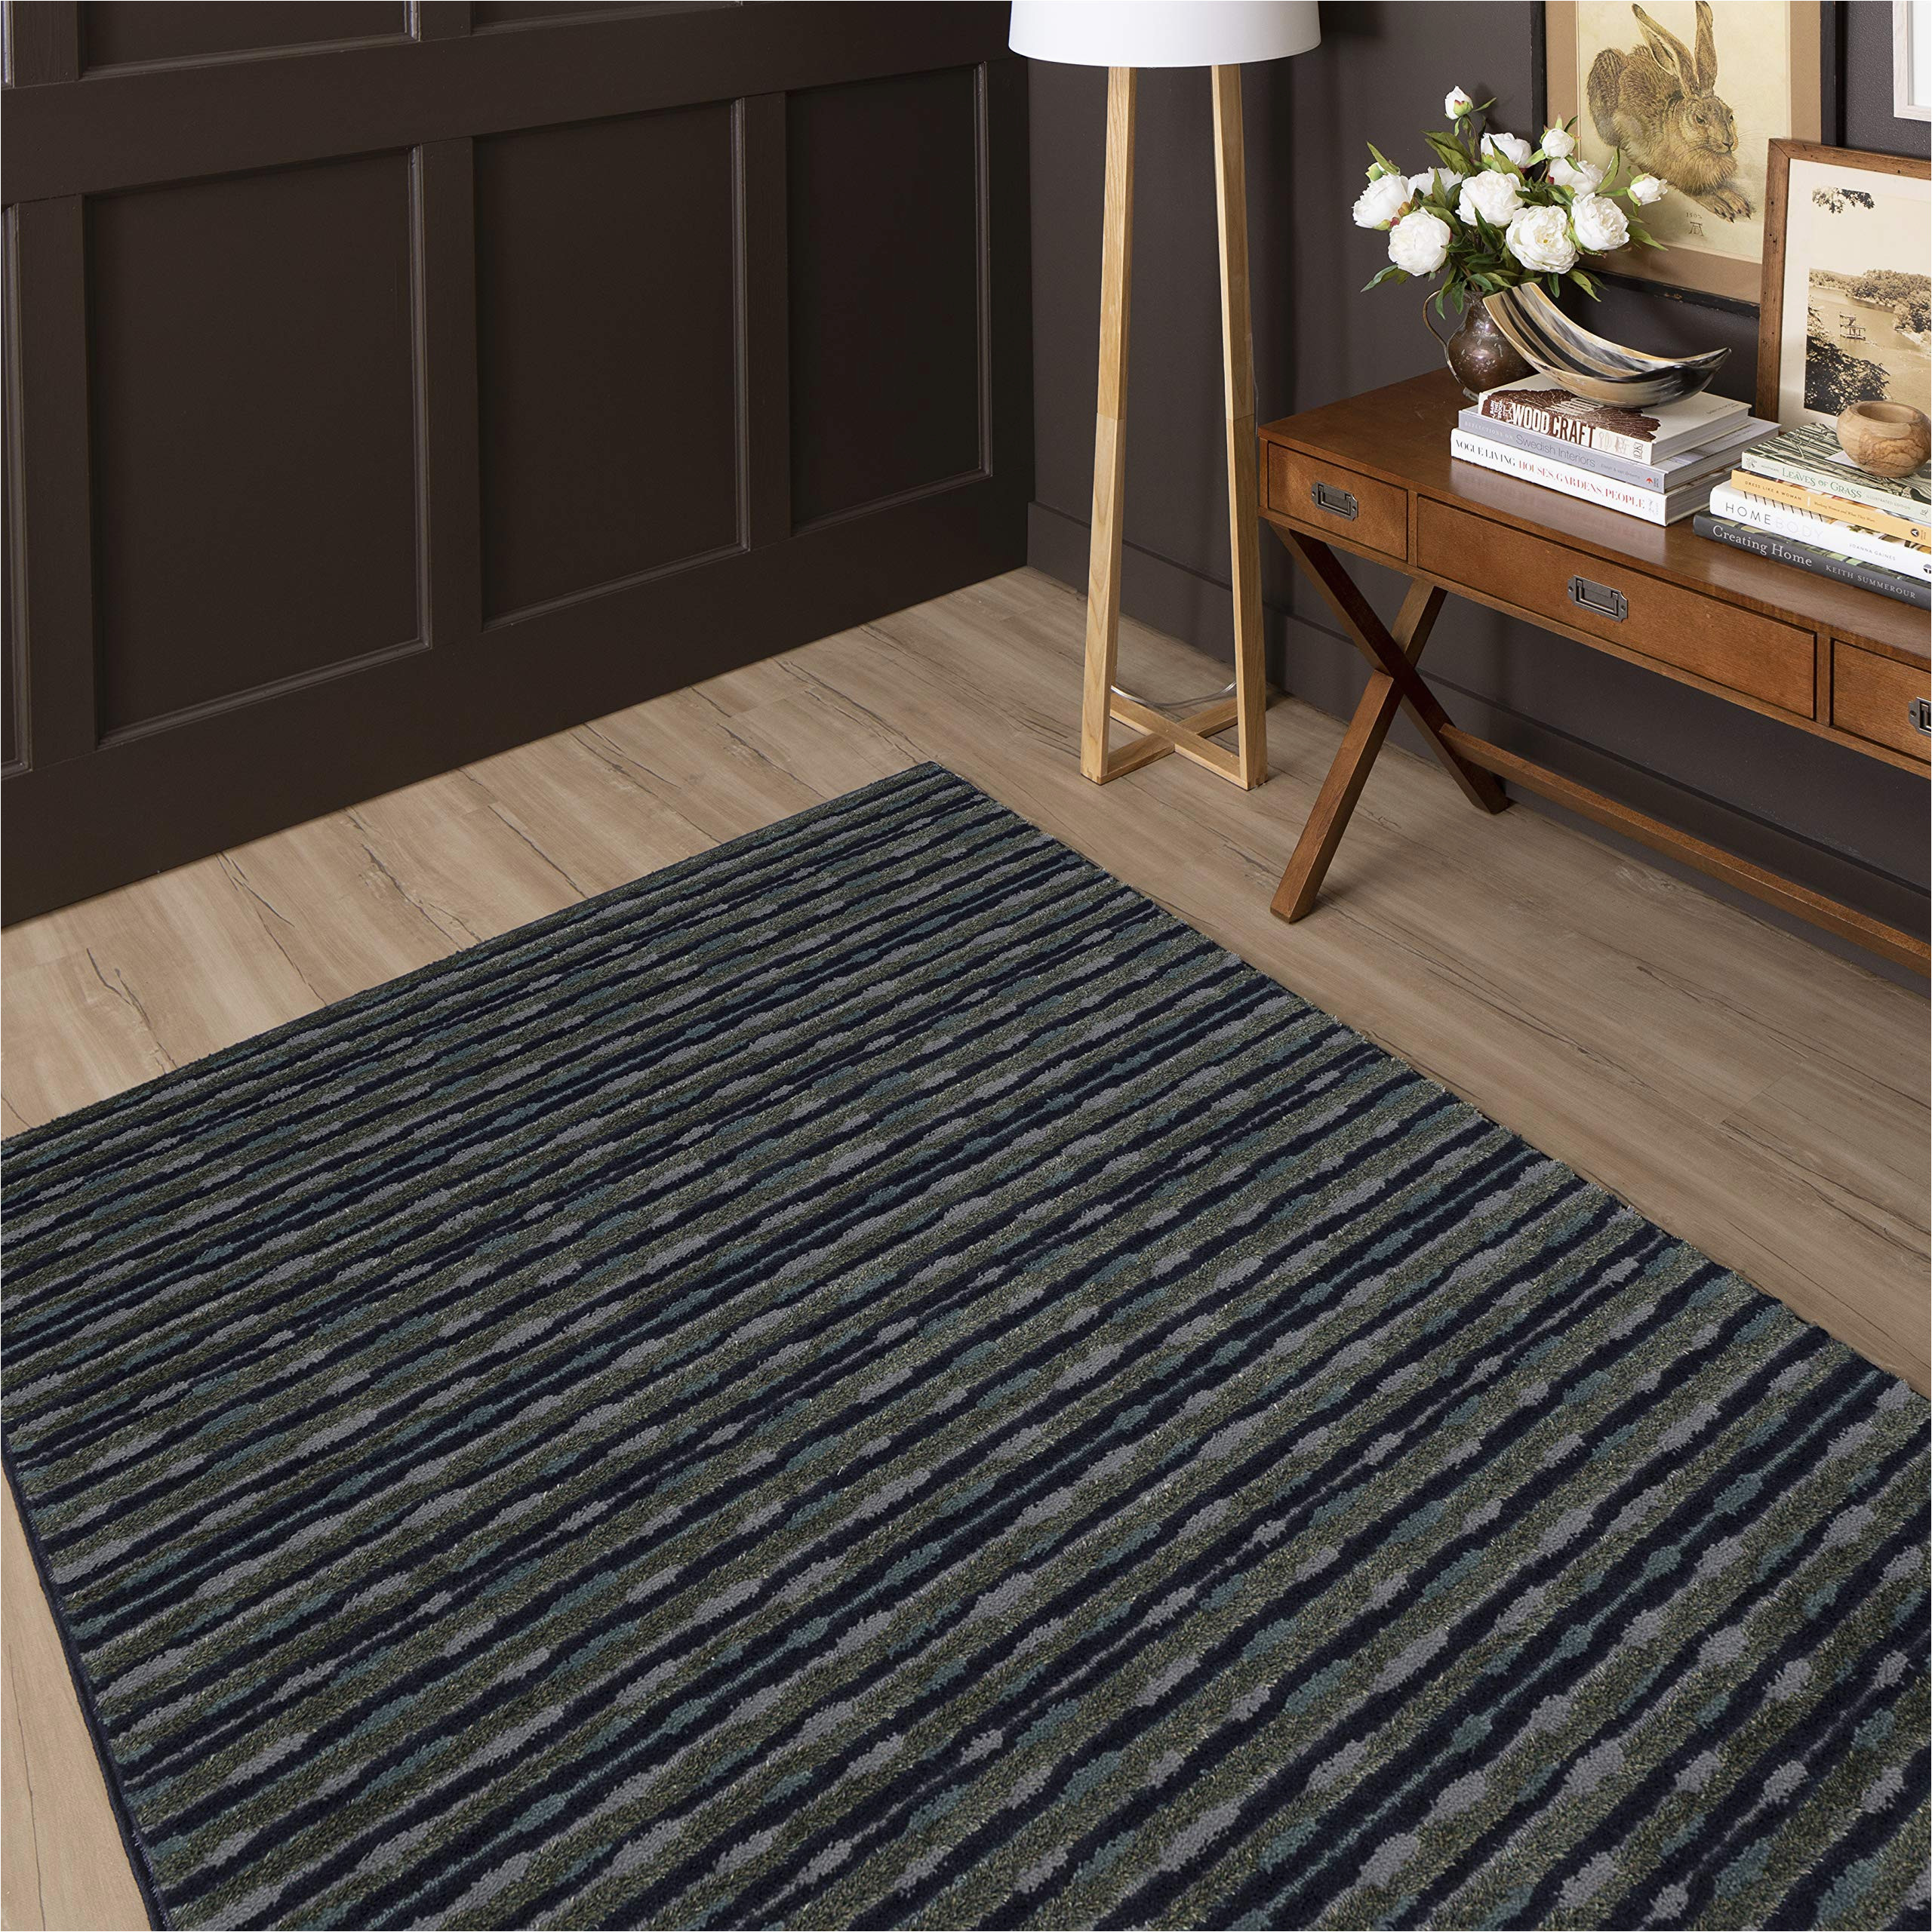 Scott Living Transform 4 area and Accent Rug Amazon.com: Mohawk Home Scott Living Transform 4 Blue Slate Rug …